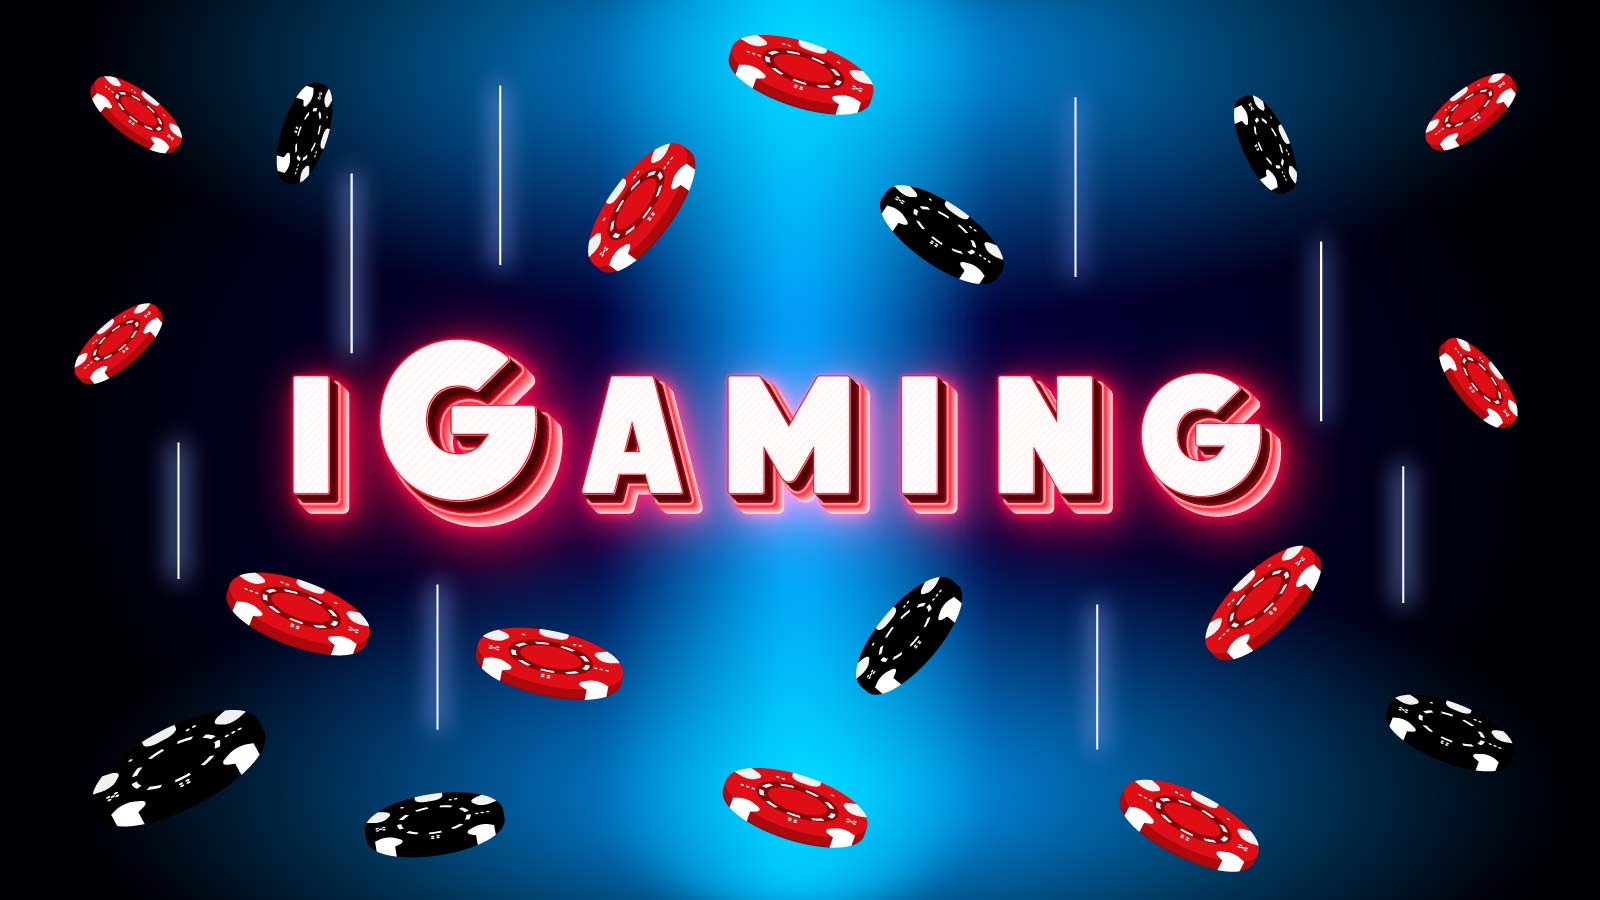 Statistics show that the U.S. iGaming industry booms